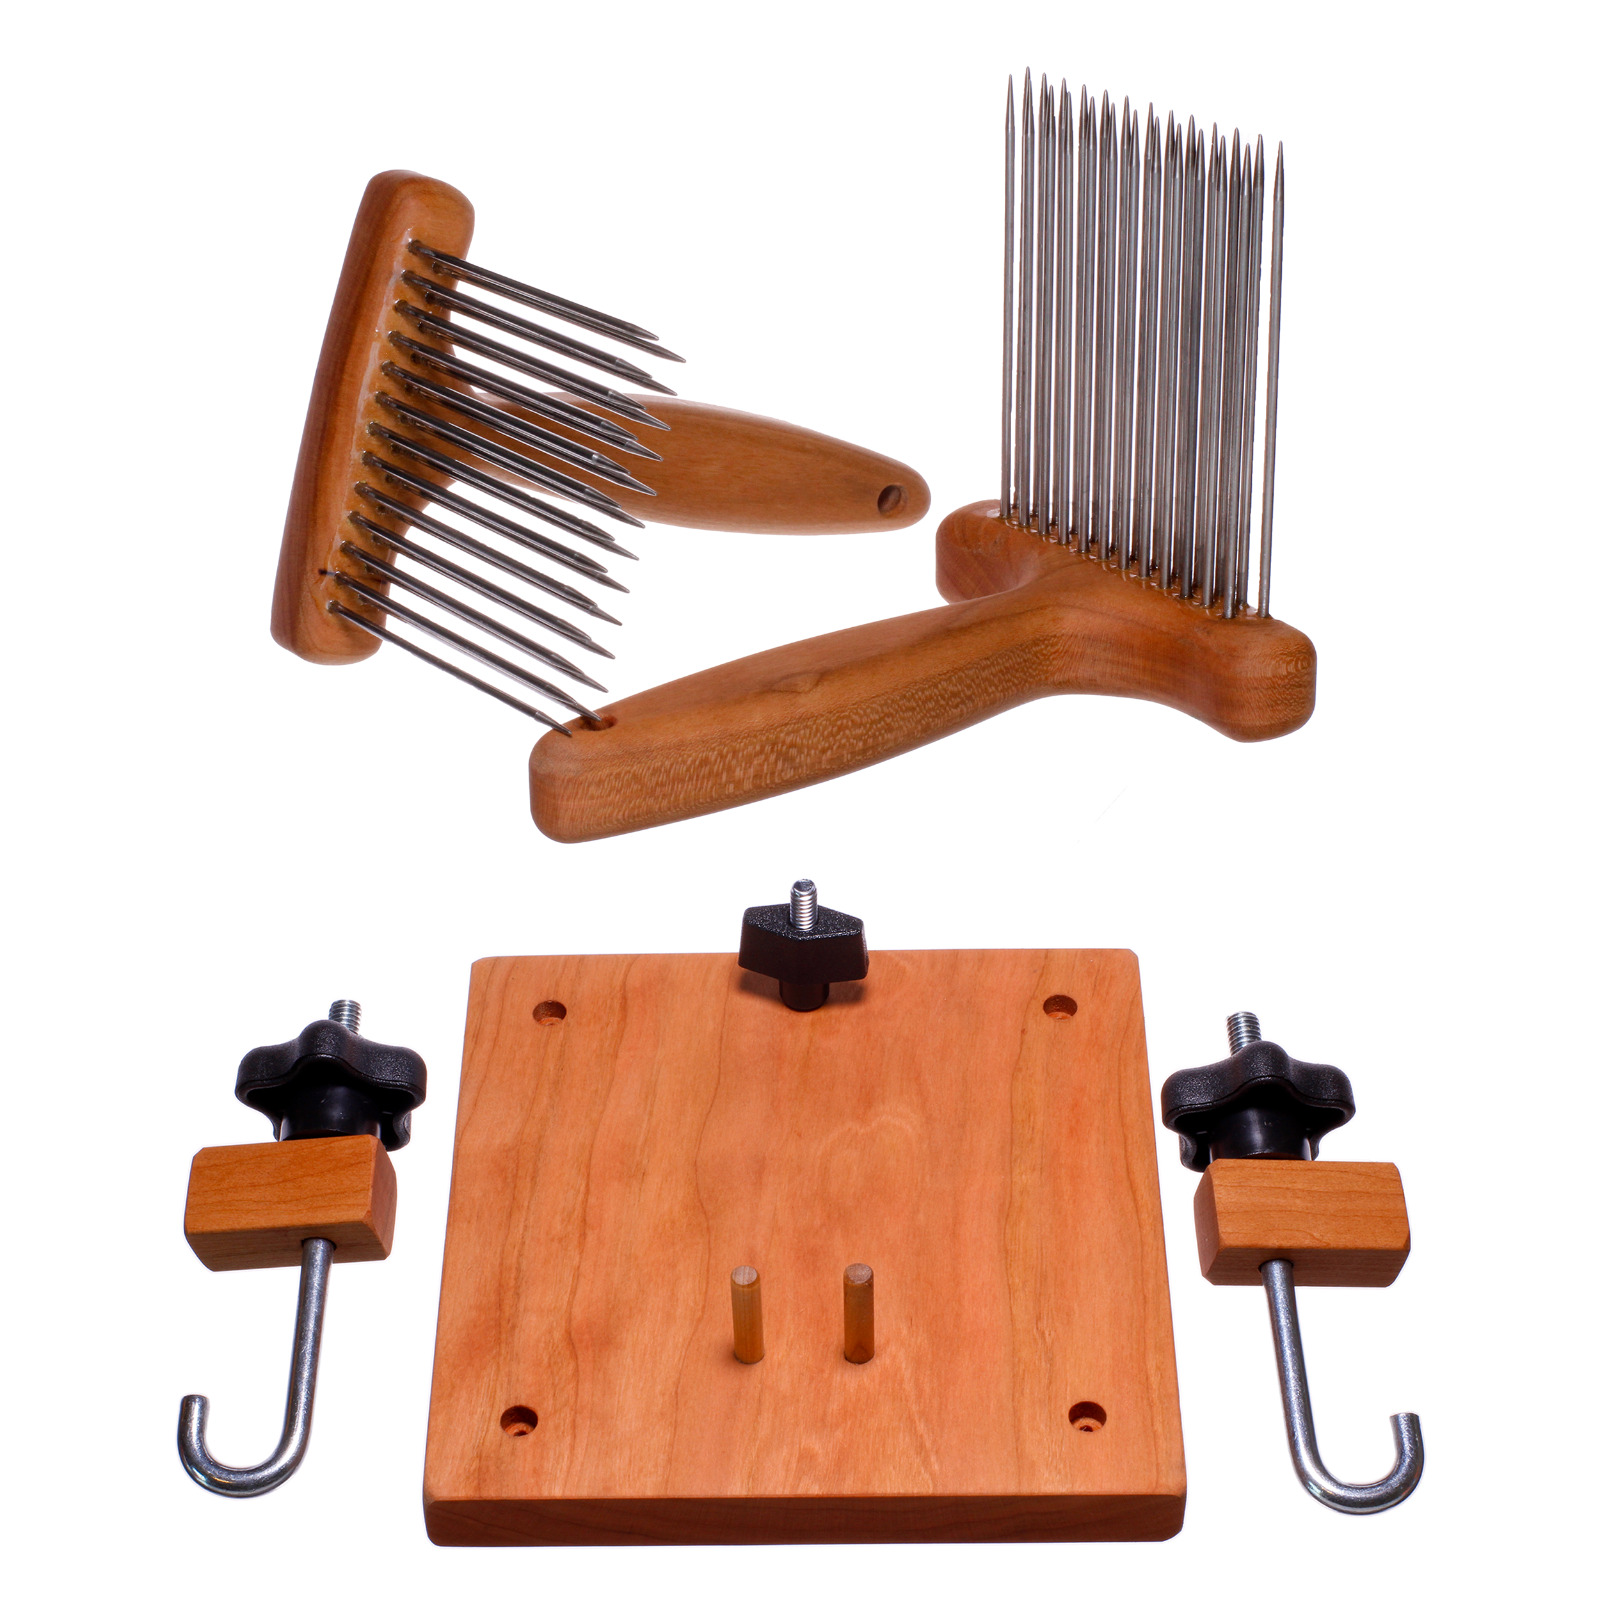 Fine Wool Combs - With Holder - Smooth Points  - Stainless Steel Tines